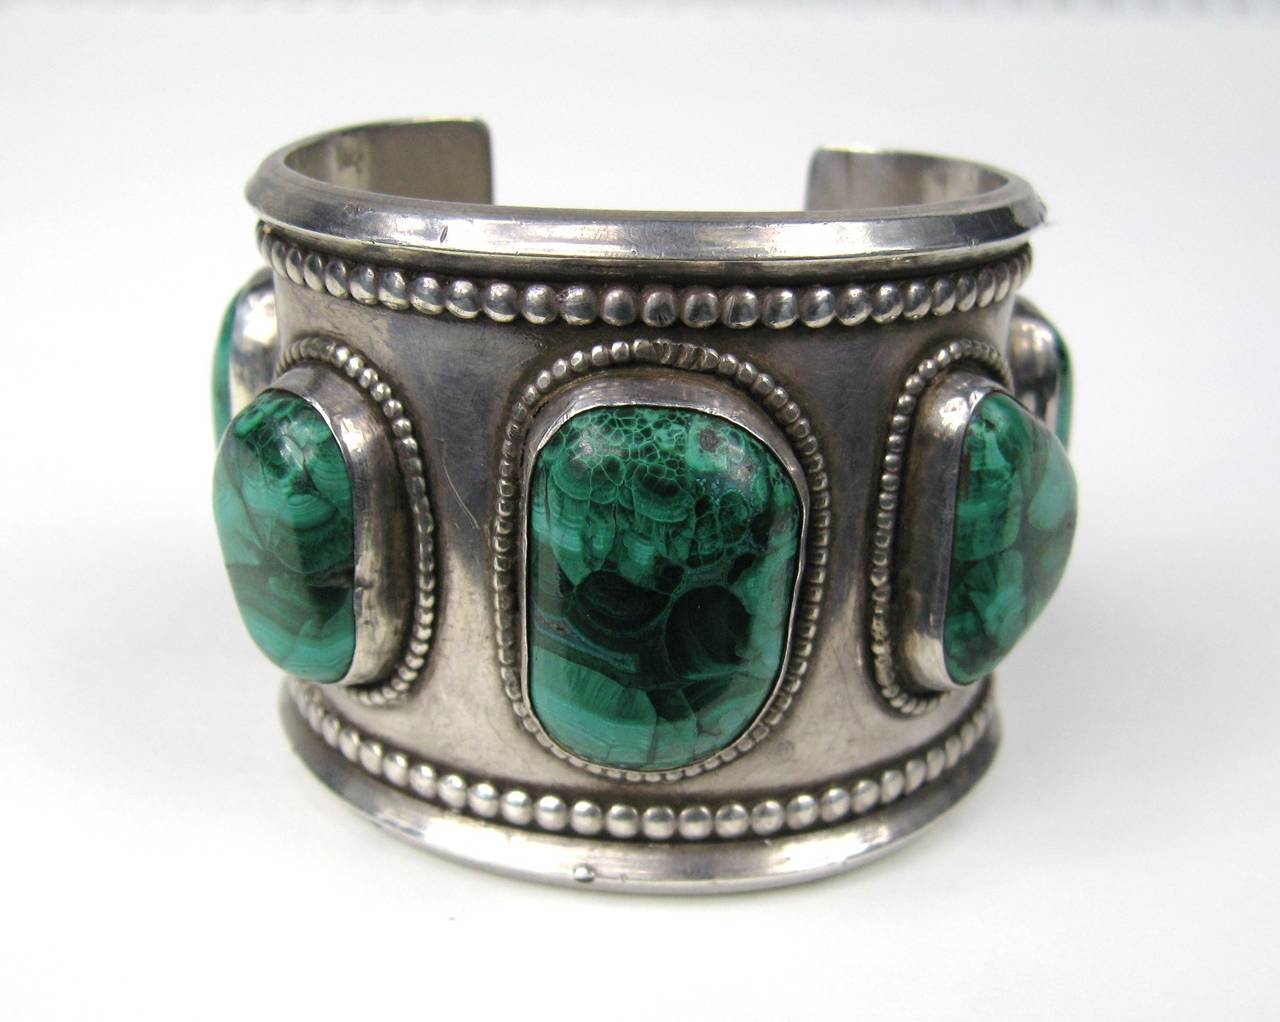 Massive bracelet with large scale Malachite stones set in this one. It measures 2.05 in wide 1.11 in x .76 in largest stone in the center 1.14 in opening will fit a size 6-7 in wrist and does have a bit of give. This is out of a massive collection